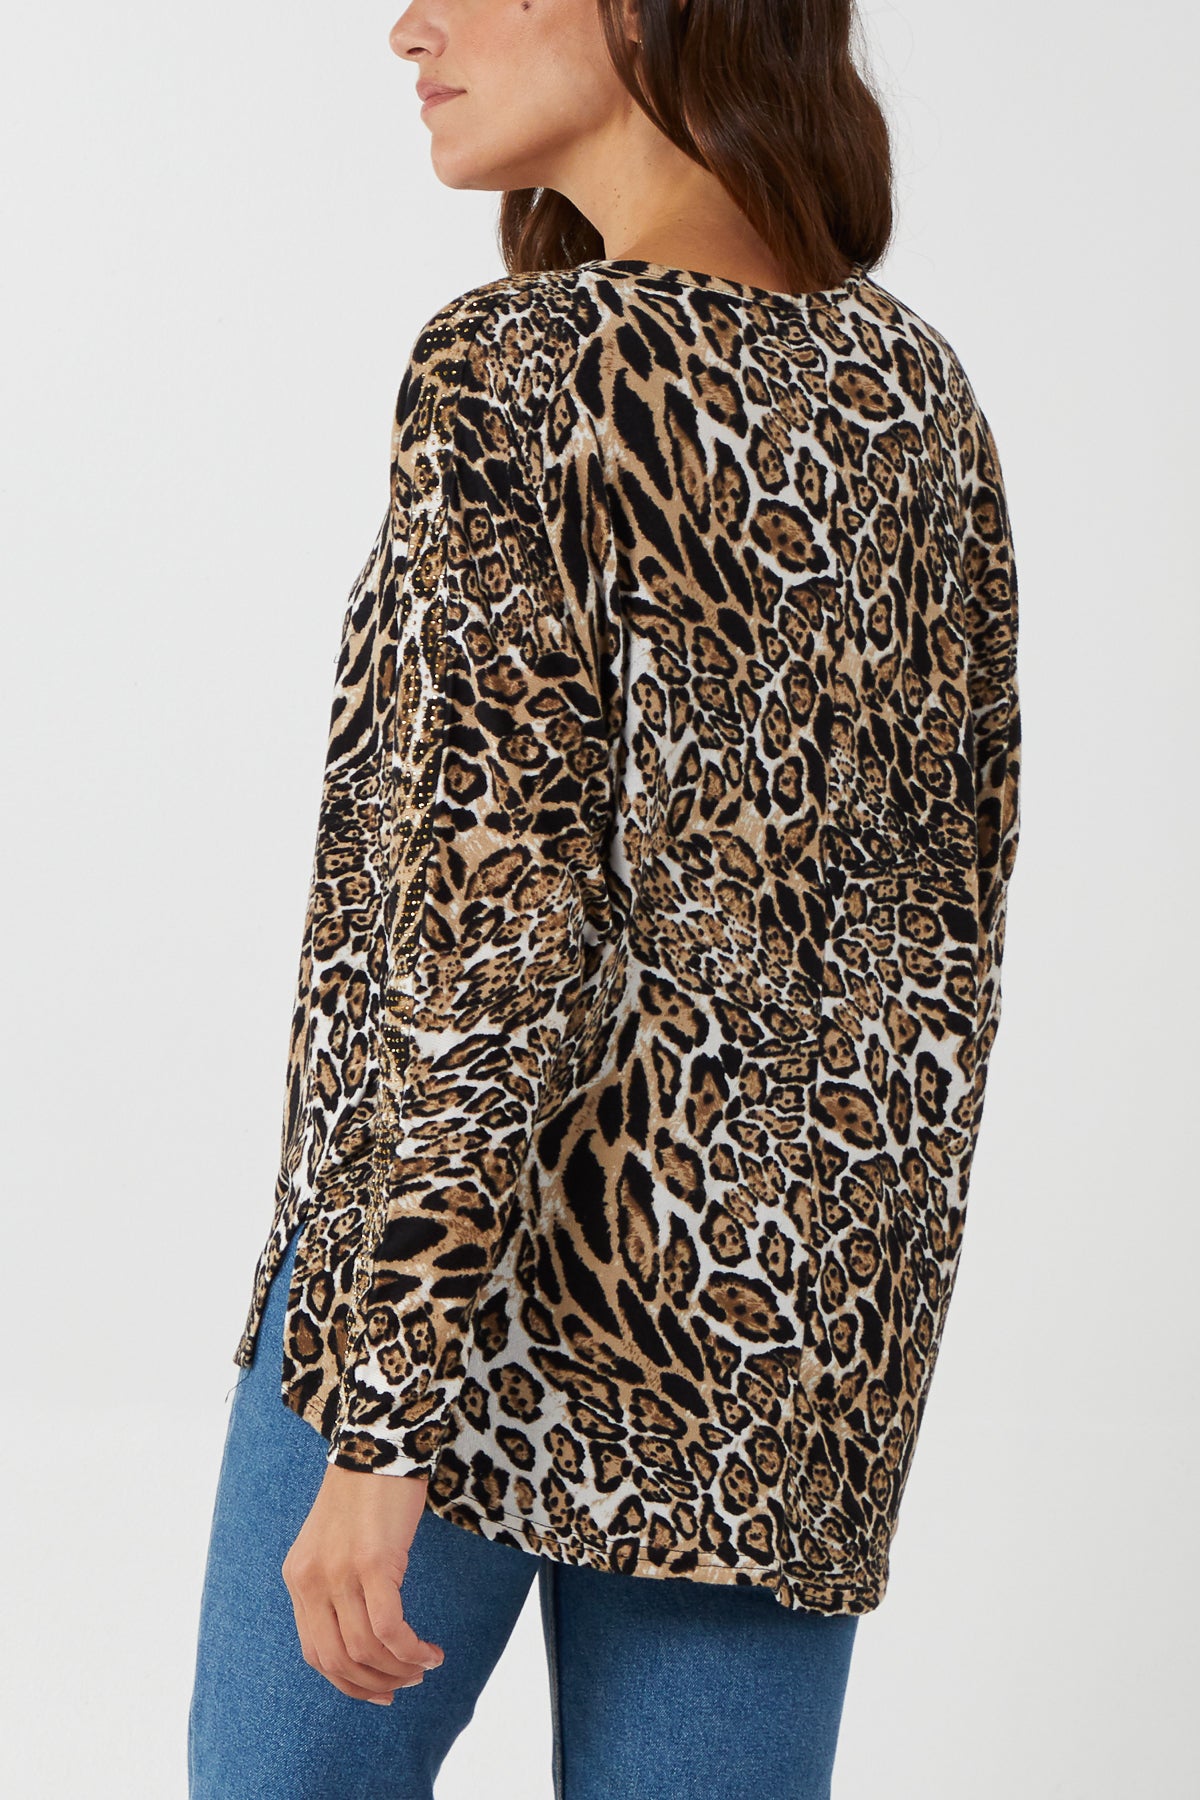 Leopard Print Crystal Detail Oversized Top